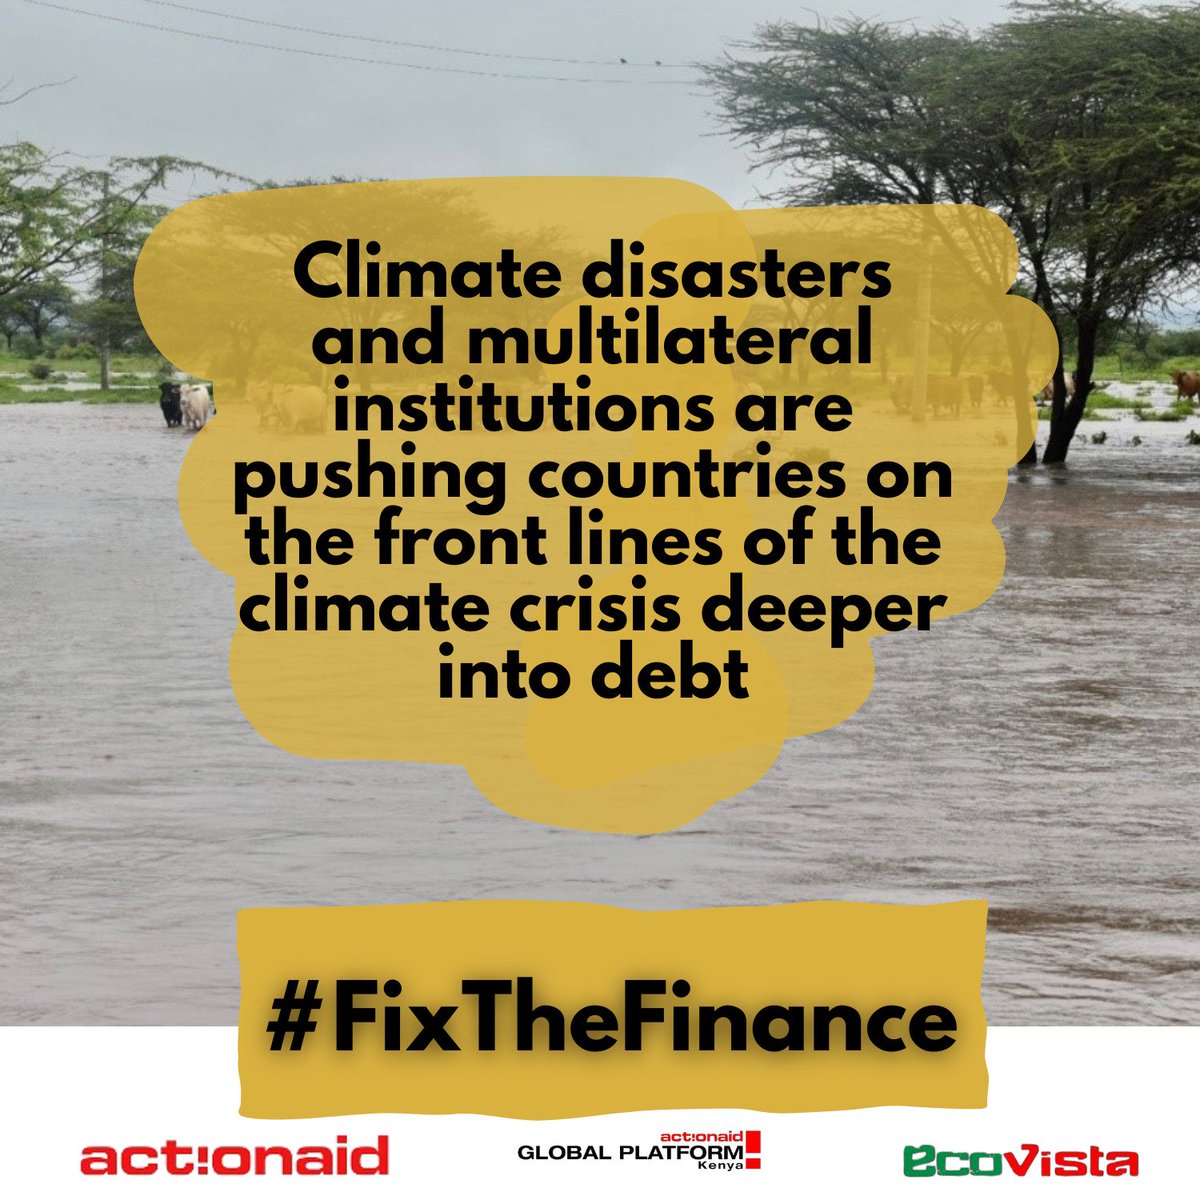 Climate disasters indeed impose a heavy burden on developing countries. These nations often lack the necessary infrastructure, resources, and capacity to adequately prepare for and respond to climate-related events such as hurricanes, floods and droughts. #ForPeopleForPlanet